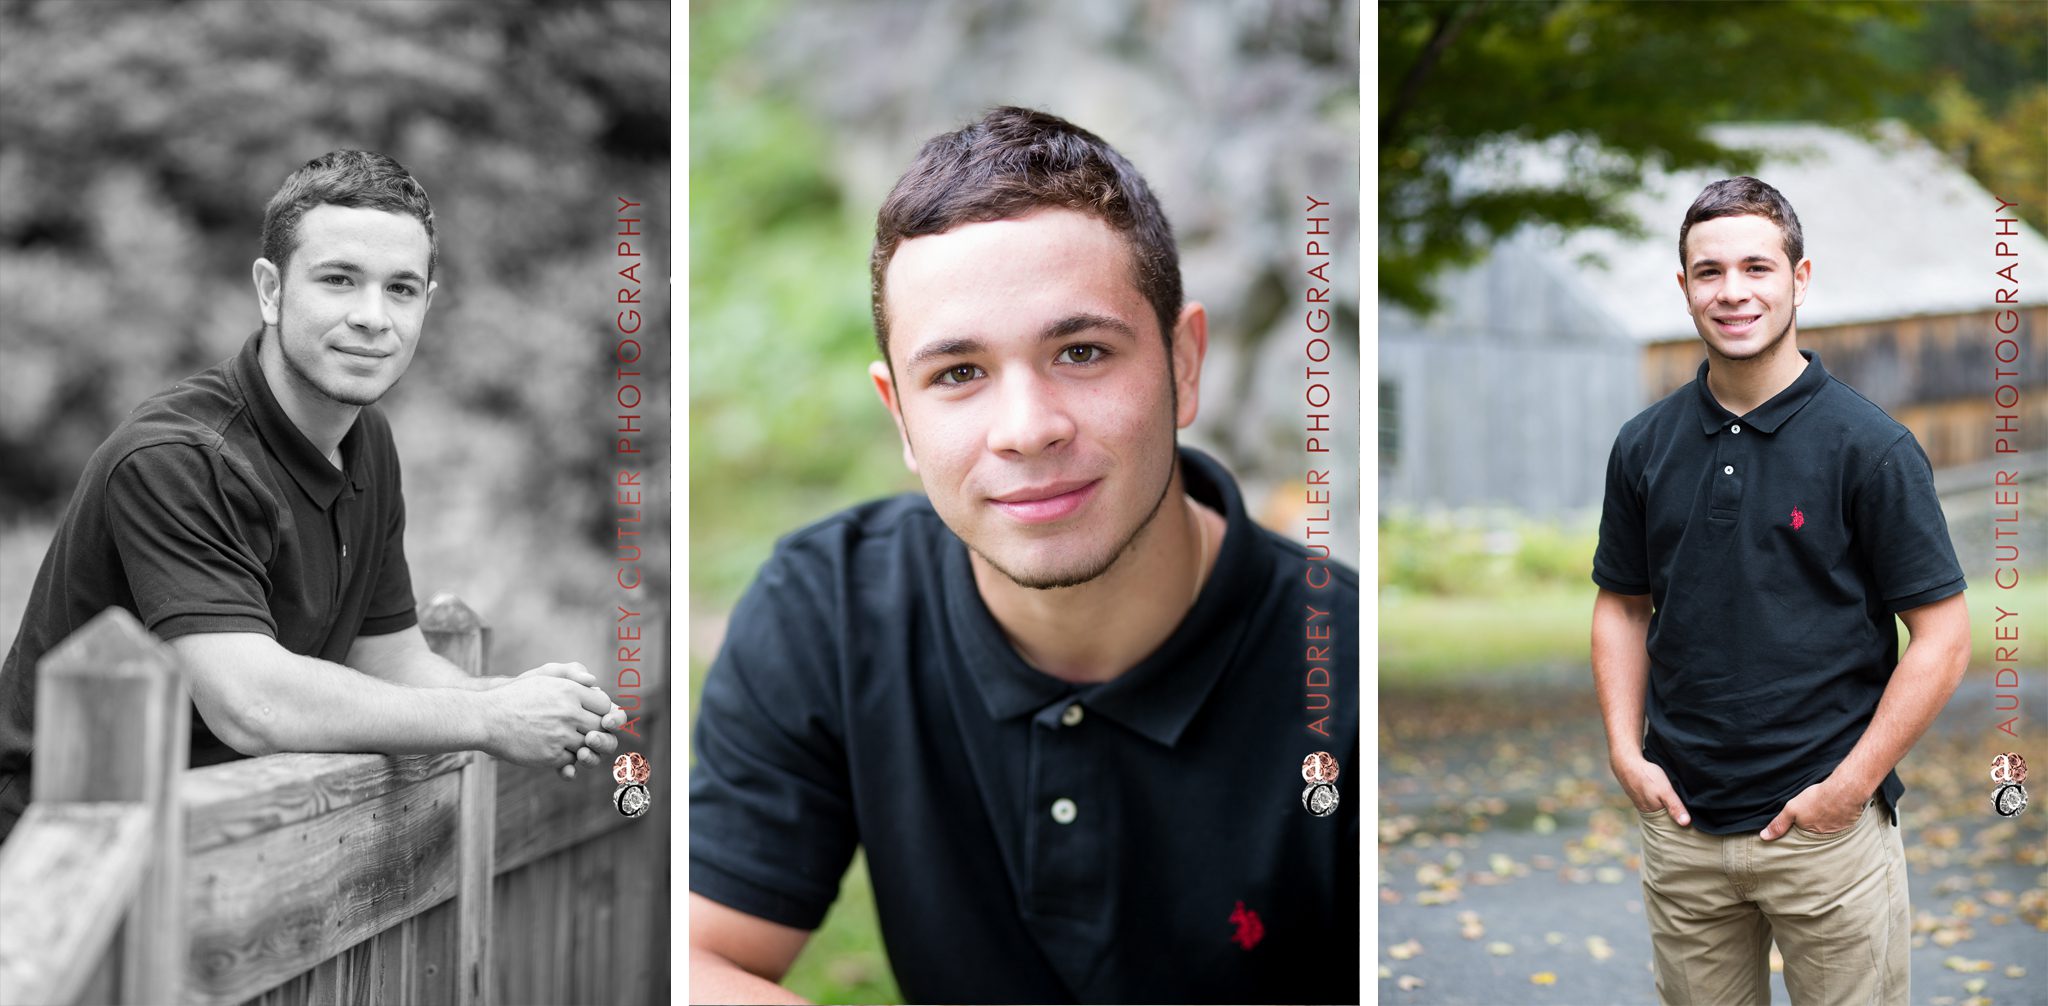 © Audrey Cutler Photography - High School Senior Yearbook - Moore State Park Paxton MA